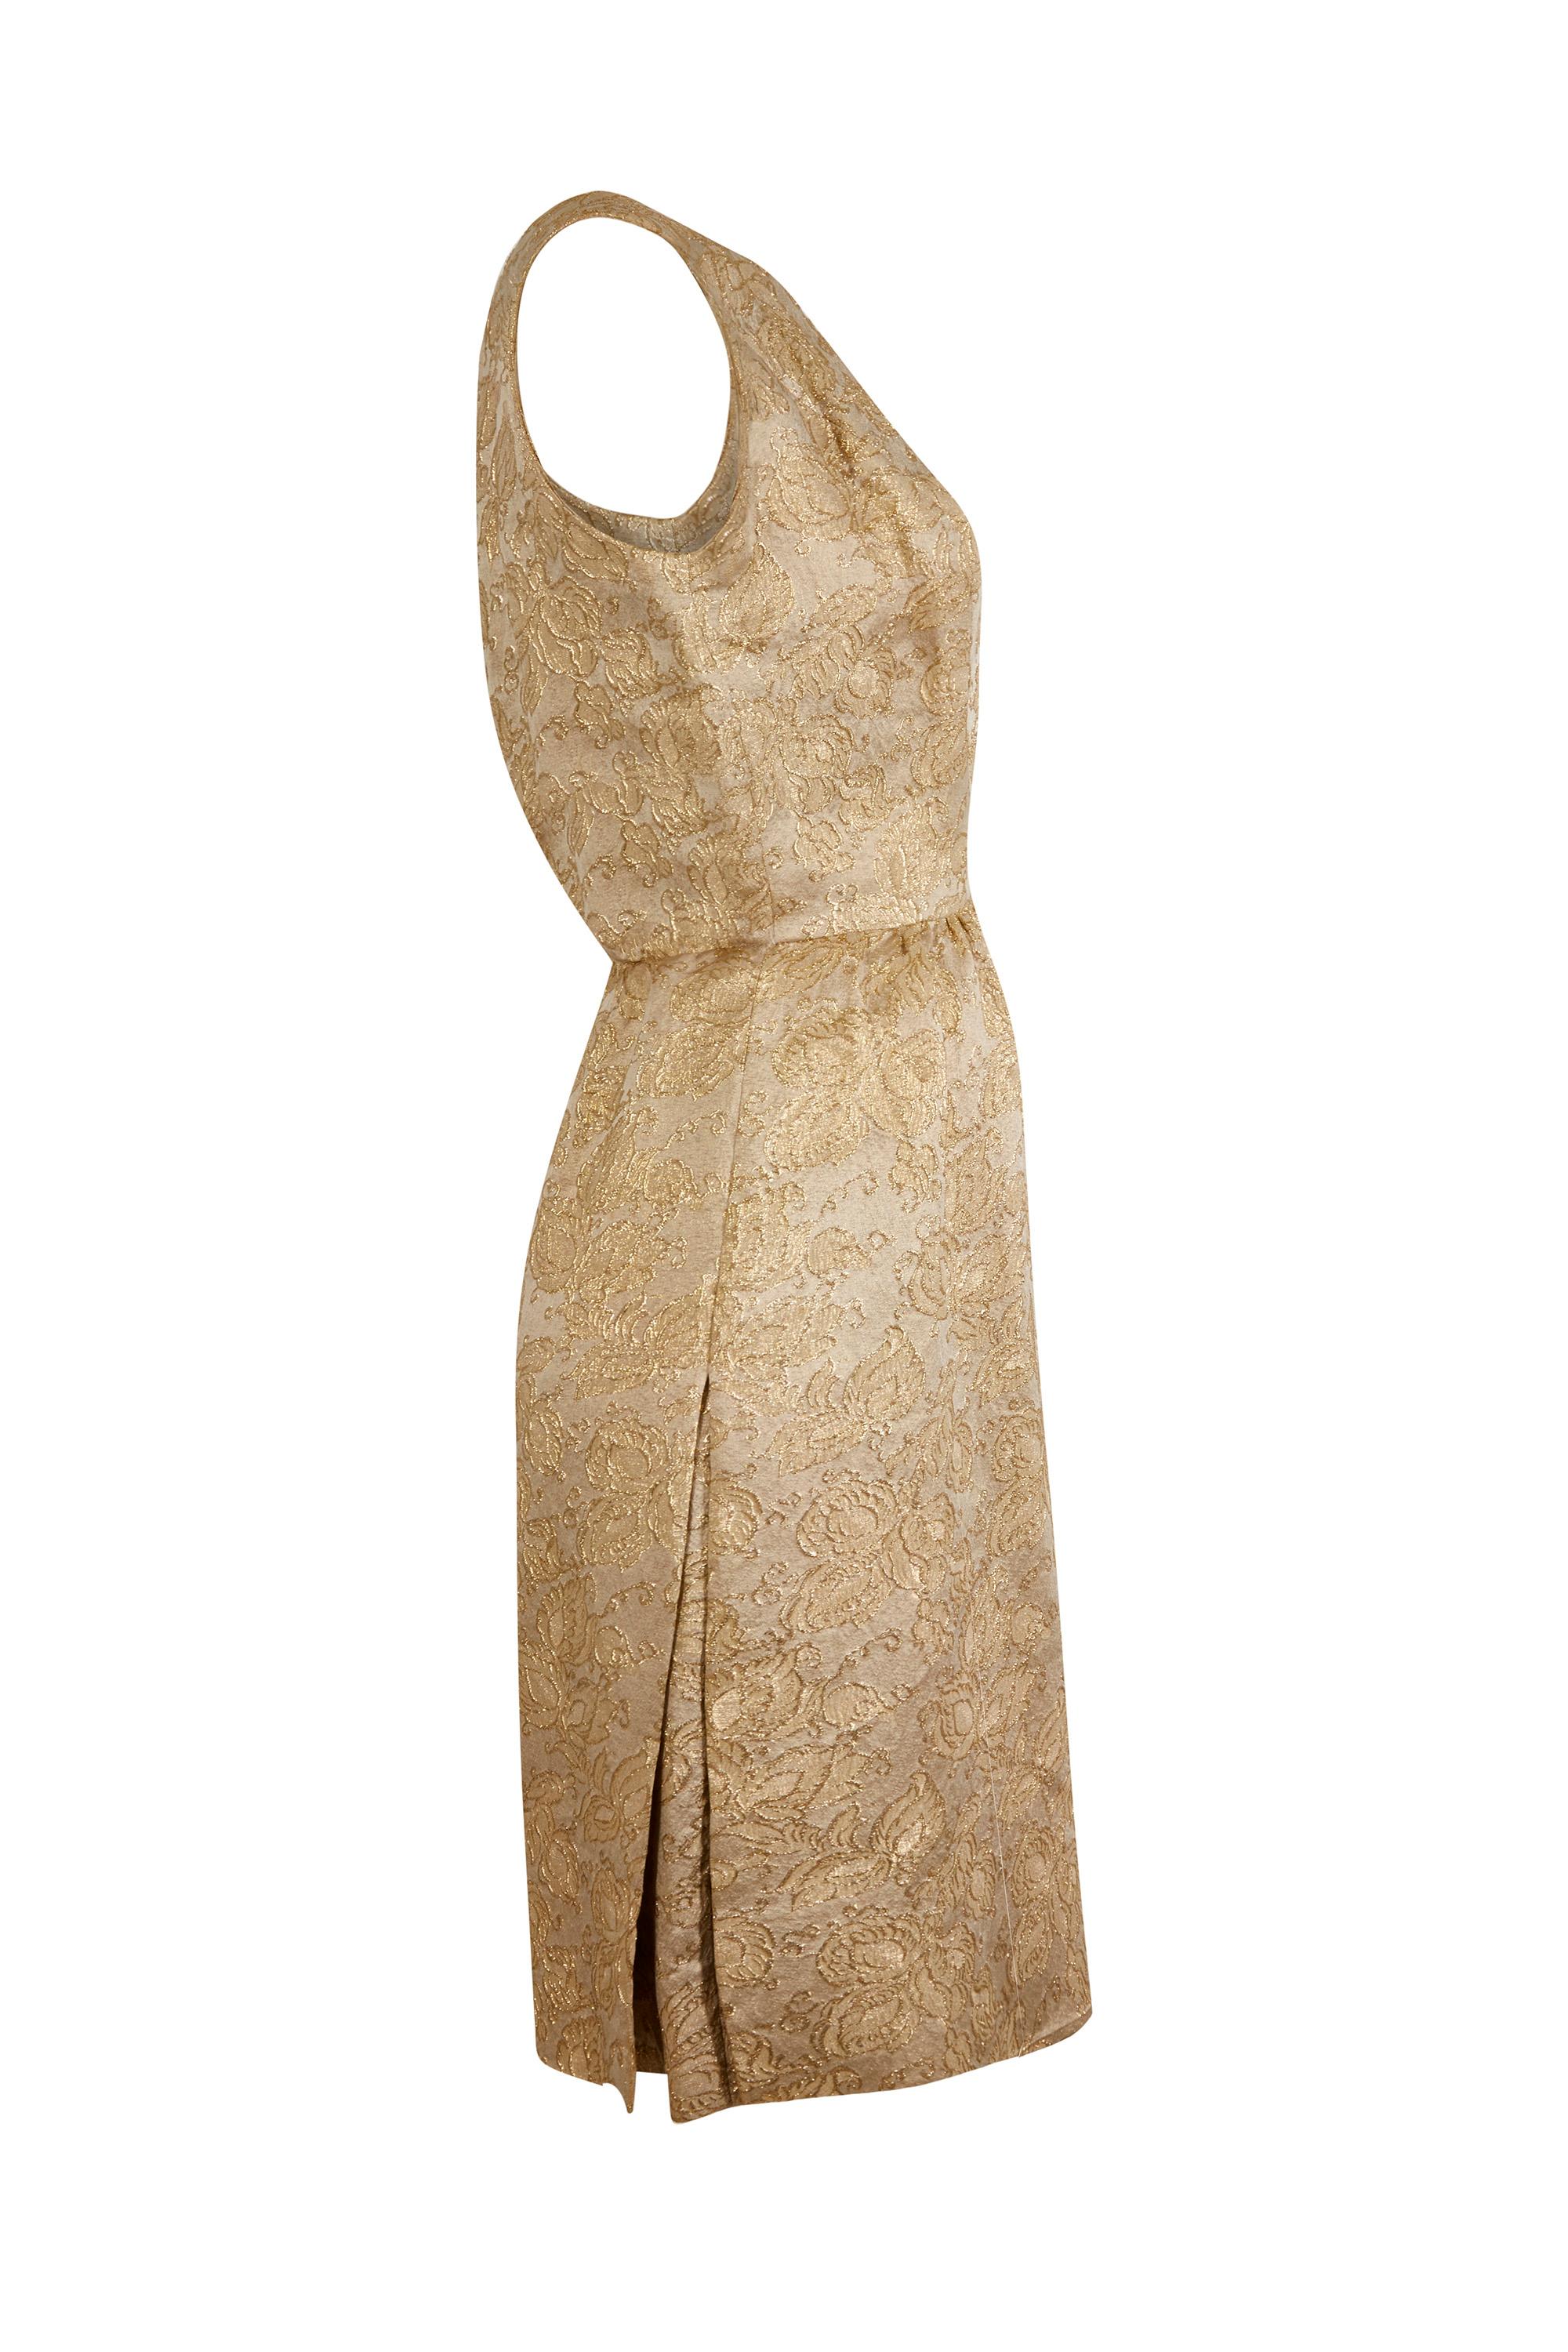 This dazzling 1950s gold brocade cocktail dress is demi-couture from Parisian designer Jacques Heim and has both simplicity and glamour with some beautiful construction details. The gold floral brocade fabric of the dress glitters pleasingly where